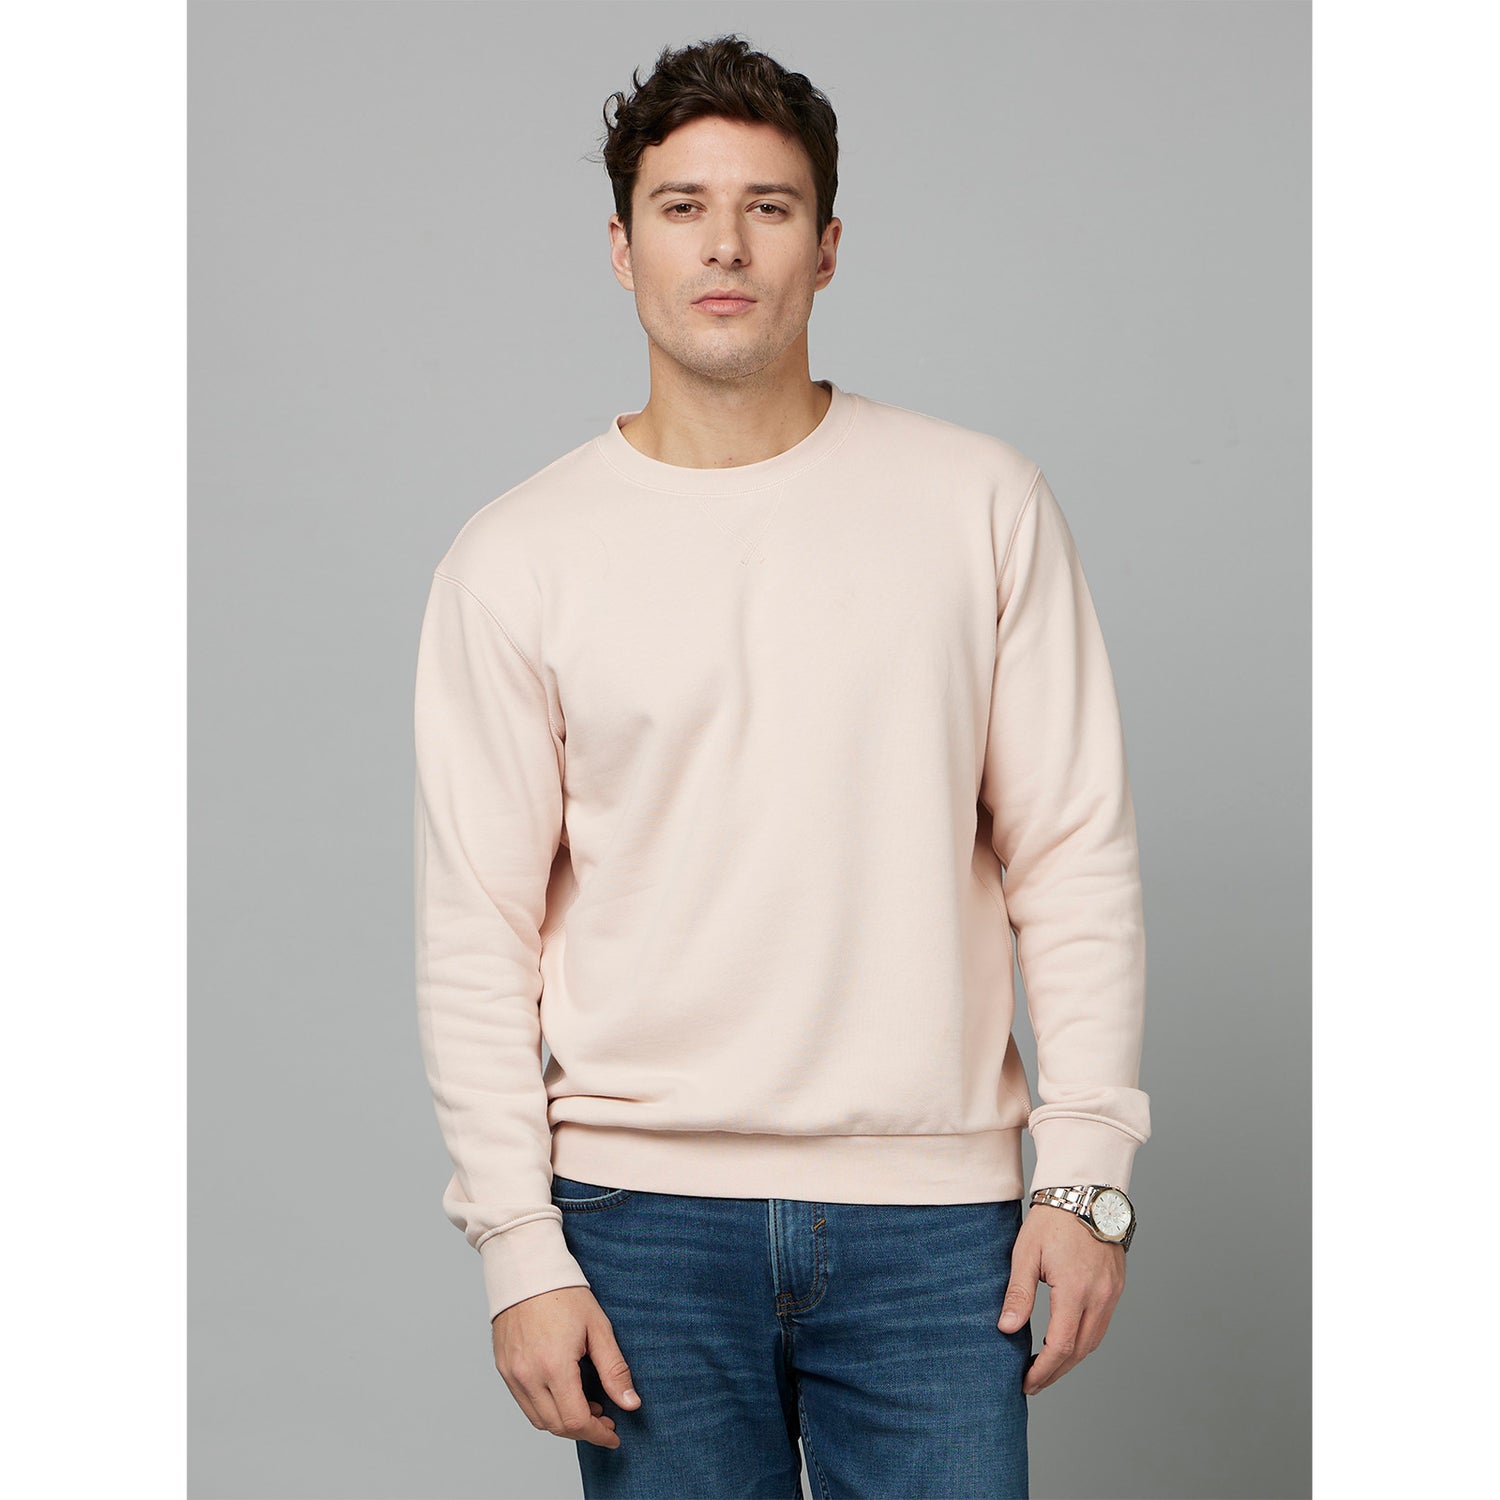 Pink Solid Long Sleeves Round Neck Sweatshirt (FESEVEN)